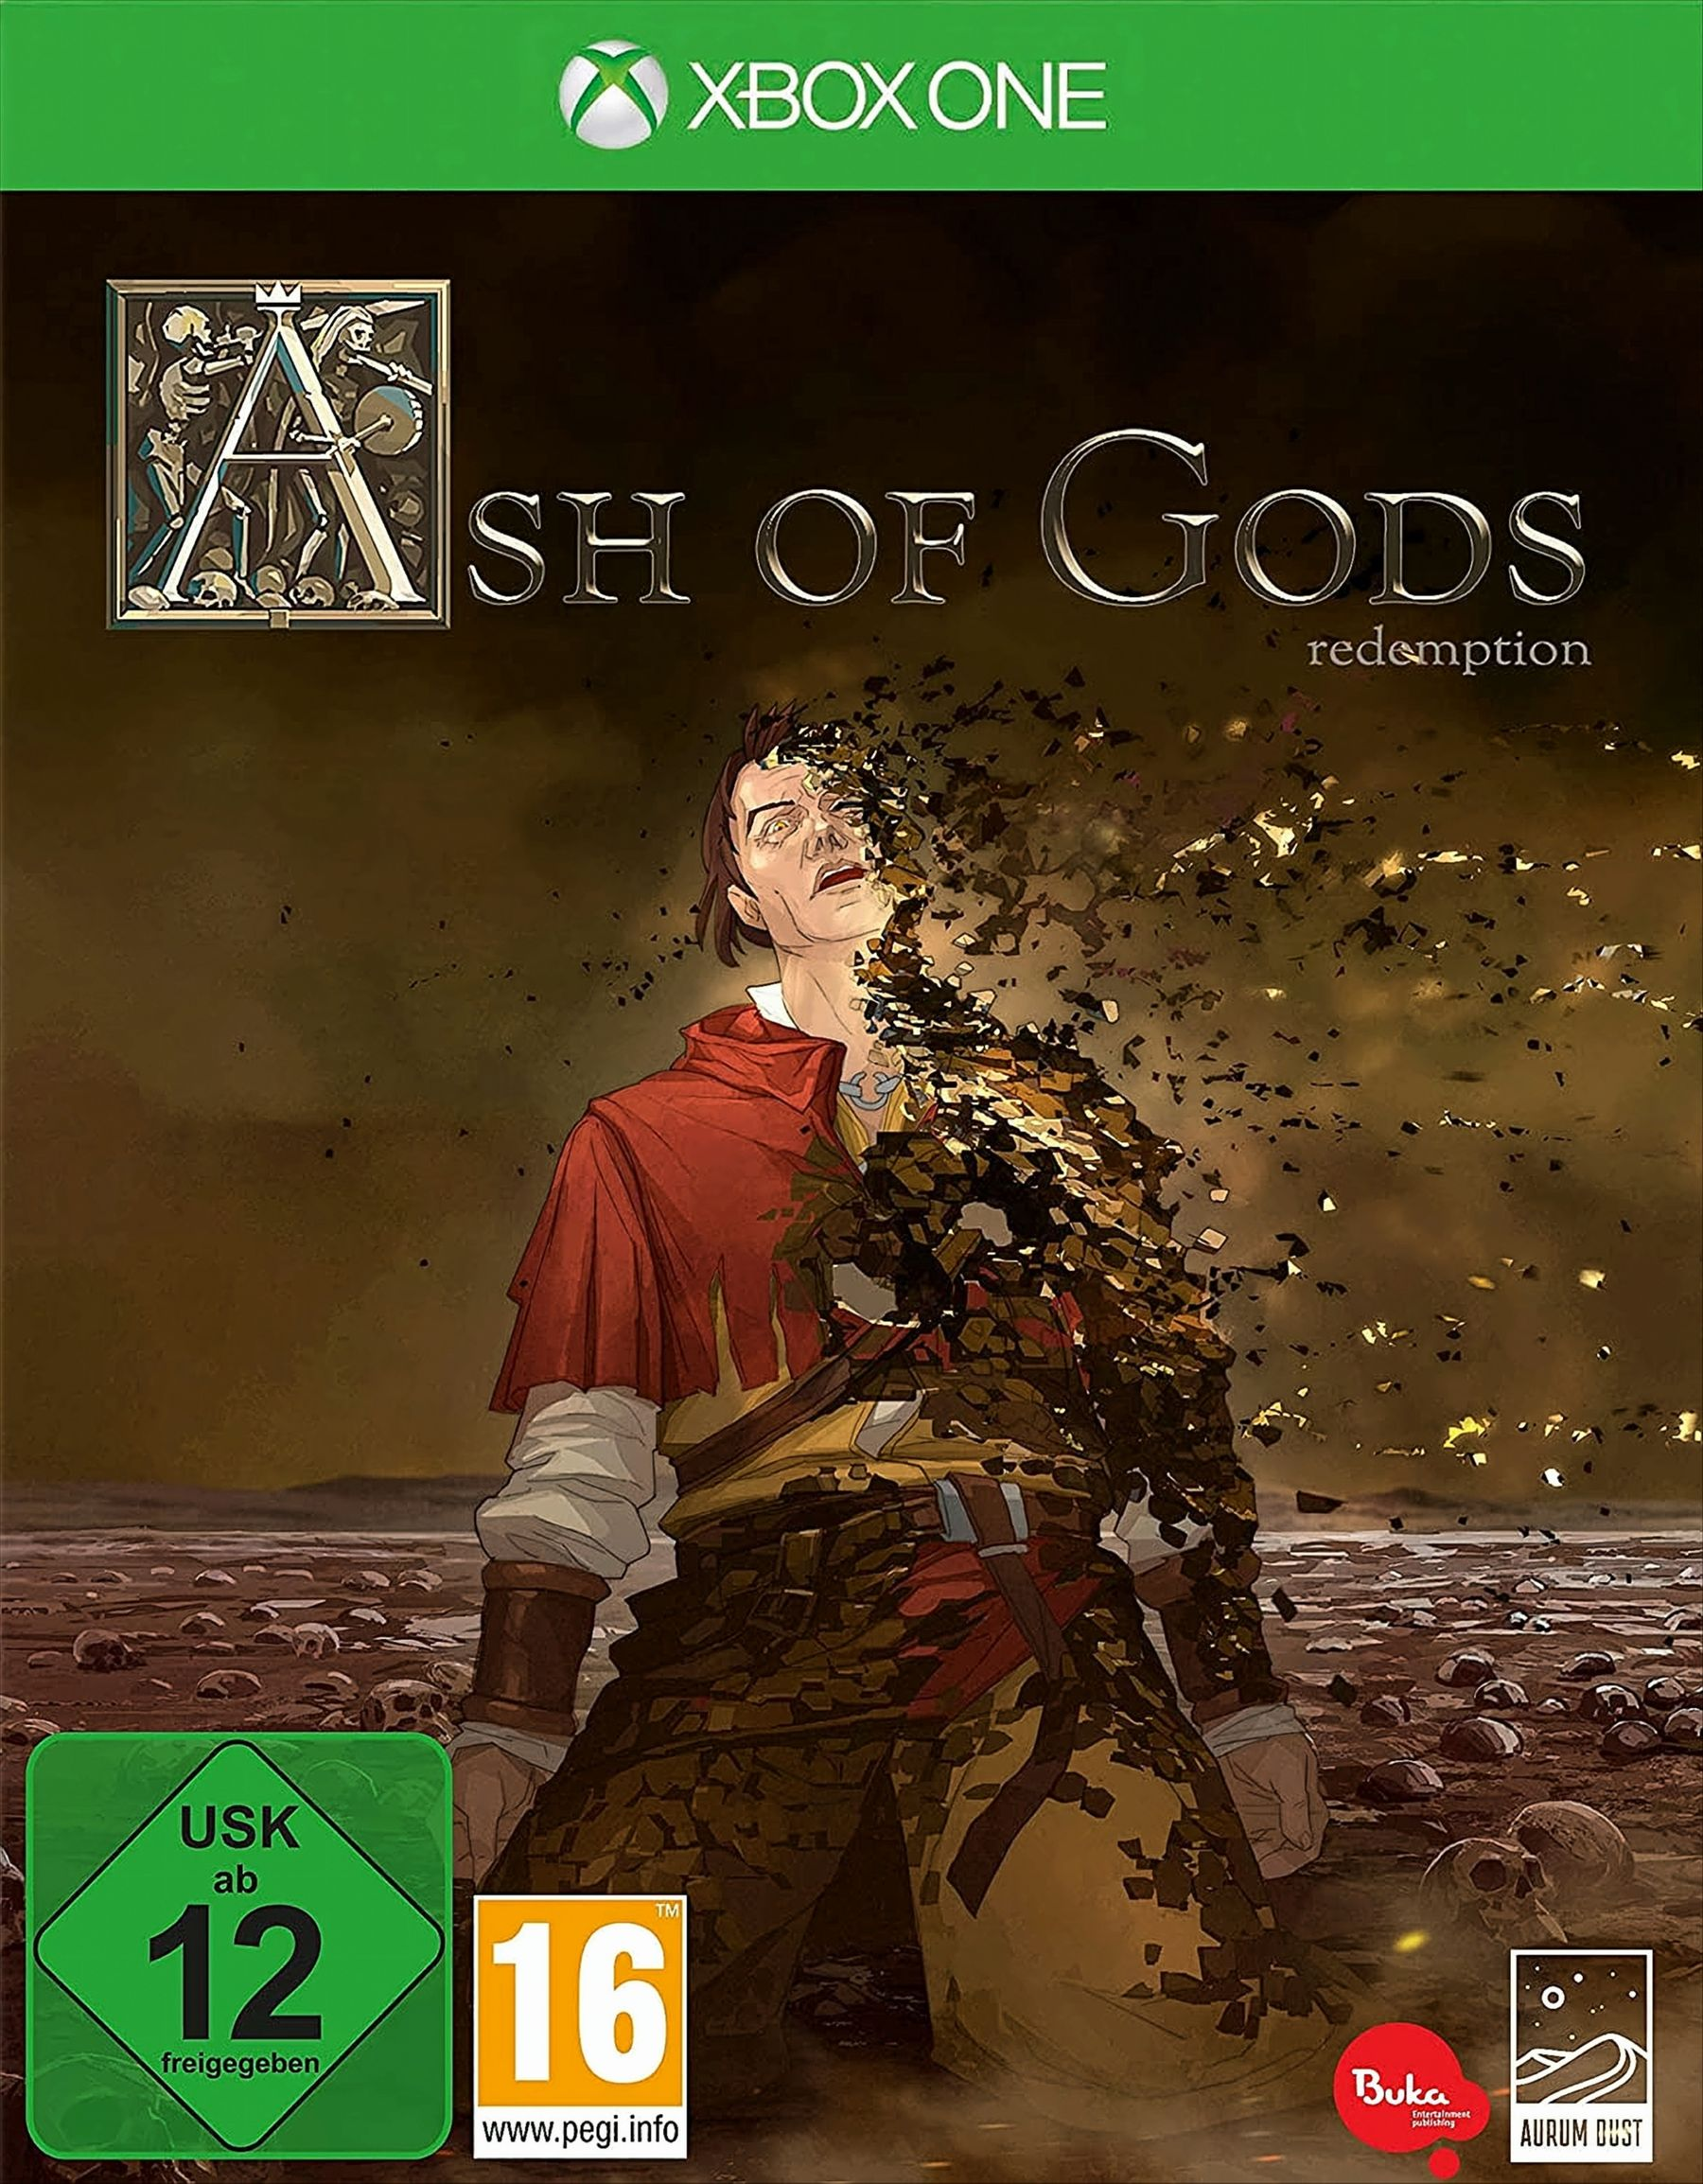 Gods: Ash - [Xbox Redemption of One]